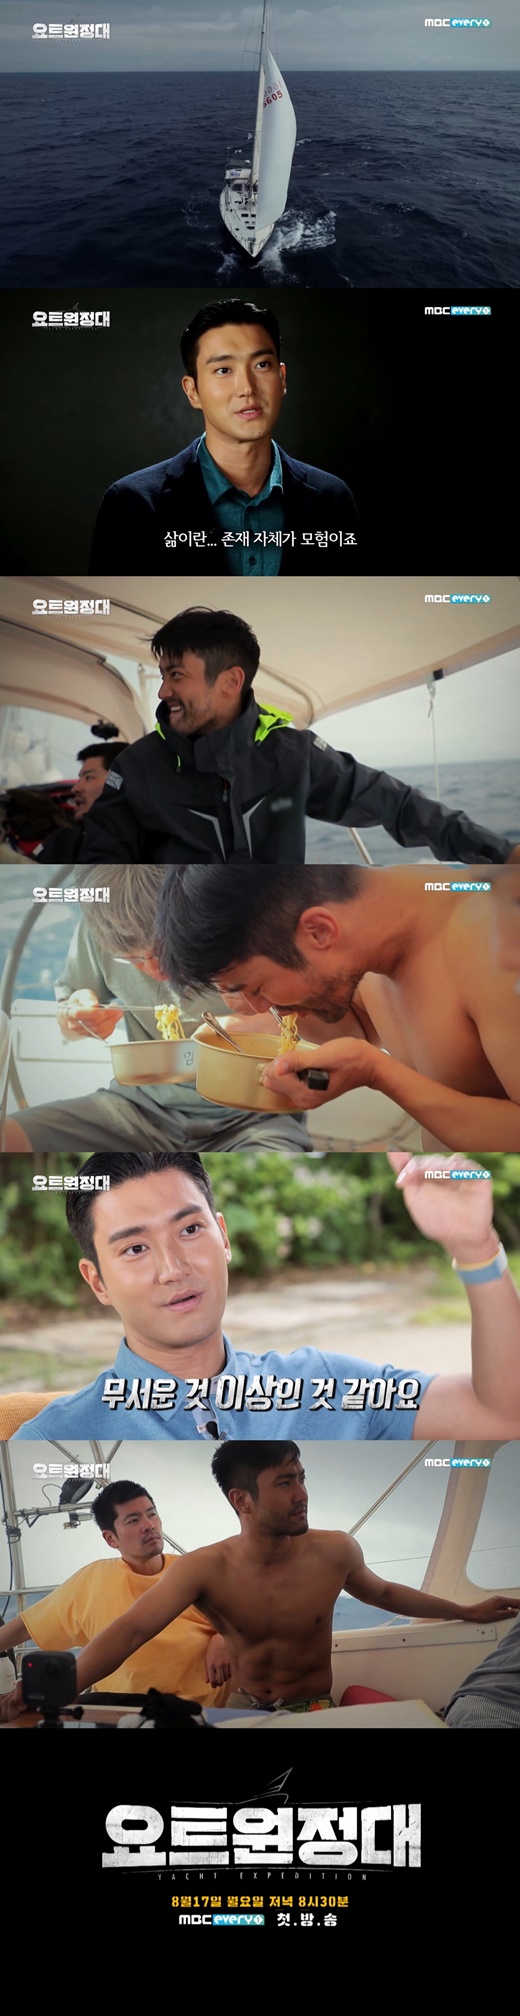 The rough adventure of Choi Siwon, yacht expedition, begins.MBC Everlons Yacht Expedition will be broadcast for the first time at 8:30 pm on Monday 17th.The yacht Expedition is a documentary entertainment program that shows the process of challenging the Pacific Ocean voyage by four men who dreamed of adventure.Captain Kim Seung-jin, who succeeded in traveling around the world alone with the first weaponless port in Korea, and four men, Jin Goo, Choi Siwon, Chang Kiha and Song Ho-joon, leave for Pacific Ocean.Earlier, the Yacht Expeditionary Team revealed the Character preview Jin Goo, which attracted attention.In the character preview, Jin Goo was enthusiastic in the rising waves and the heavy rain, and made him expect a raw Earth 2.In the meantime, the second character preview of the yacht Expedition was released.The yacht expedition Character preview Choi Siwon begins with a voice called Its not easy for us to sail, a yacht that is shaken by a dangerously shaky stomach, and Choi Siwons Im not going to sail.Then, Choi Siwon, who is sailing on the actual yacht, is revealed without hesitation.Choi Siwon was motion sick on a shaking yacht, or hit by a water slap because of unstoppable waves.The scenes that follow are also the shock itself.Choi Siwon, who grew up with a beard, took off his top and inhaled ramen on the yacht, falling and falling in a shaking wave.If Choi Siwon, a synonym for health, has been shaken to this extent, I am more curious about what the situation has been.Choi Siwon, who was excited that life is an adventure itself, said, I think it is more than scary.The production team of the yacht expedition was also confident of the second real Earth, which was not seen in any entertainment.The first broadcast of MBC Everlon yacht Expedition is expected to be broadcast on the Pacific Ocean navigator, which is a blockbuster of Jin Goo, Choi Siwon, Chang Kiha and Song Ho-joon.The first broadcast on Monday, August 17 at 8:30 p.m.